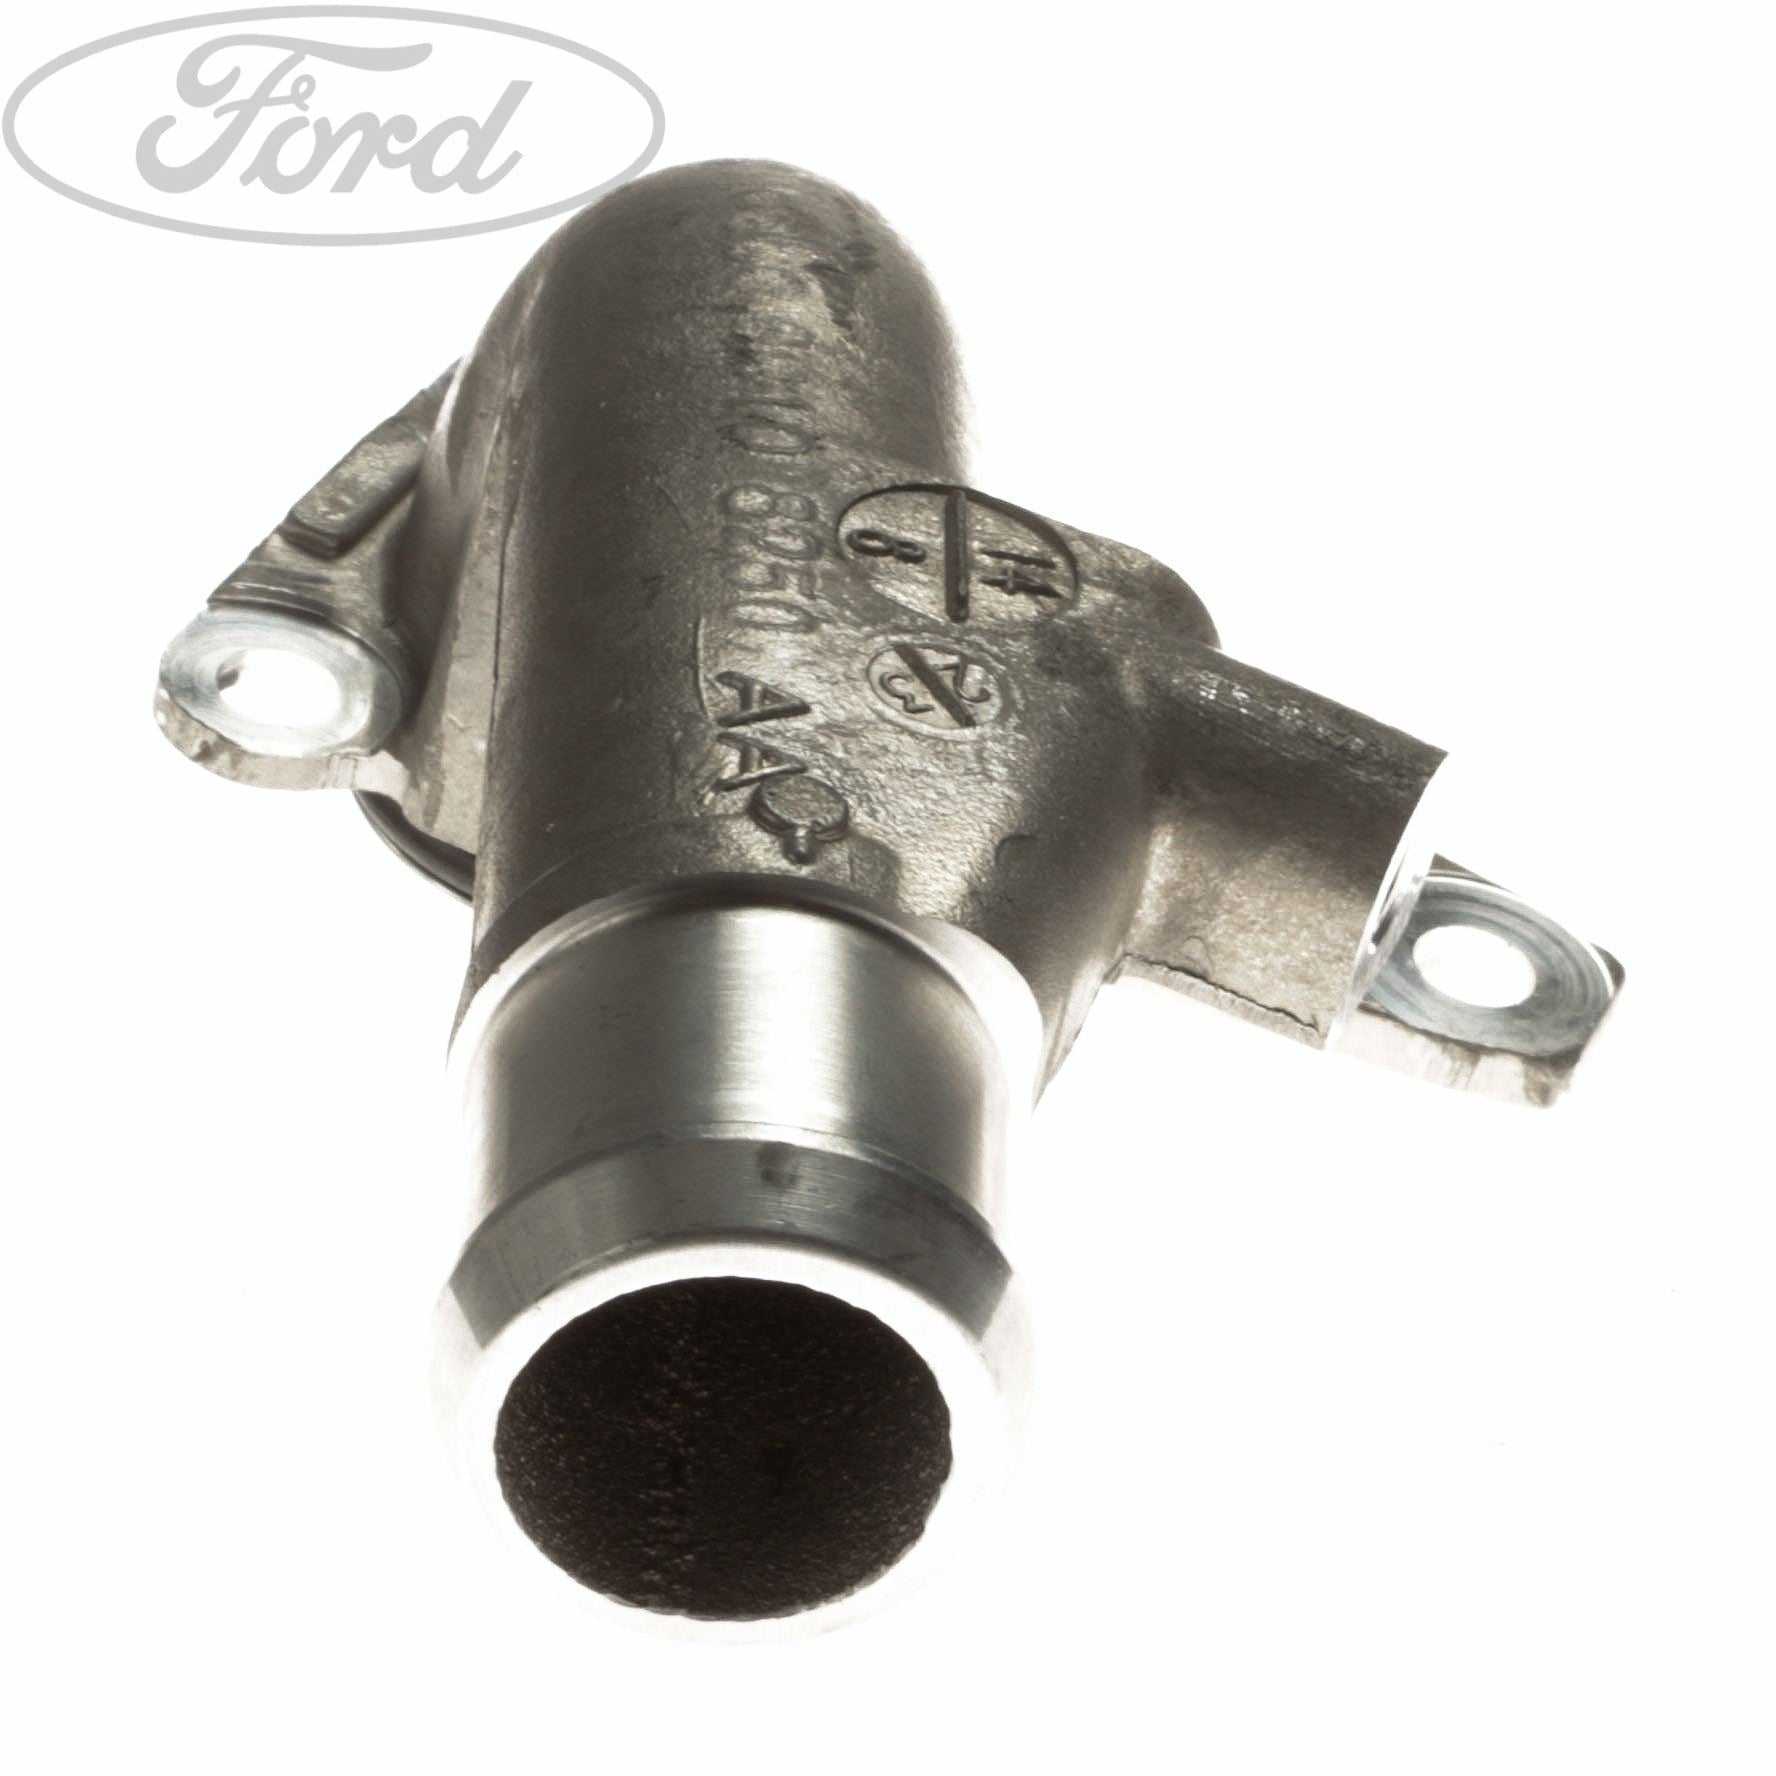 Ford, THERMOSTAT WATER OUTLET CONNECTION